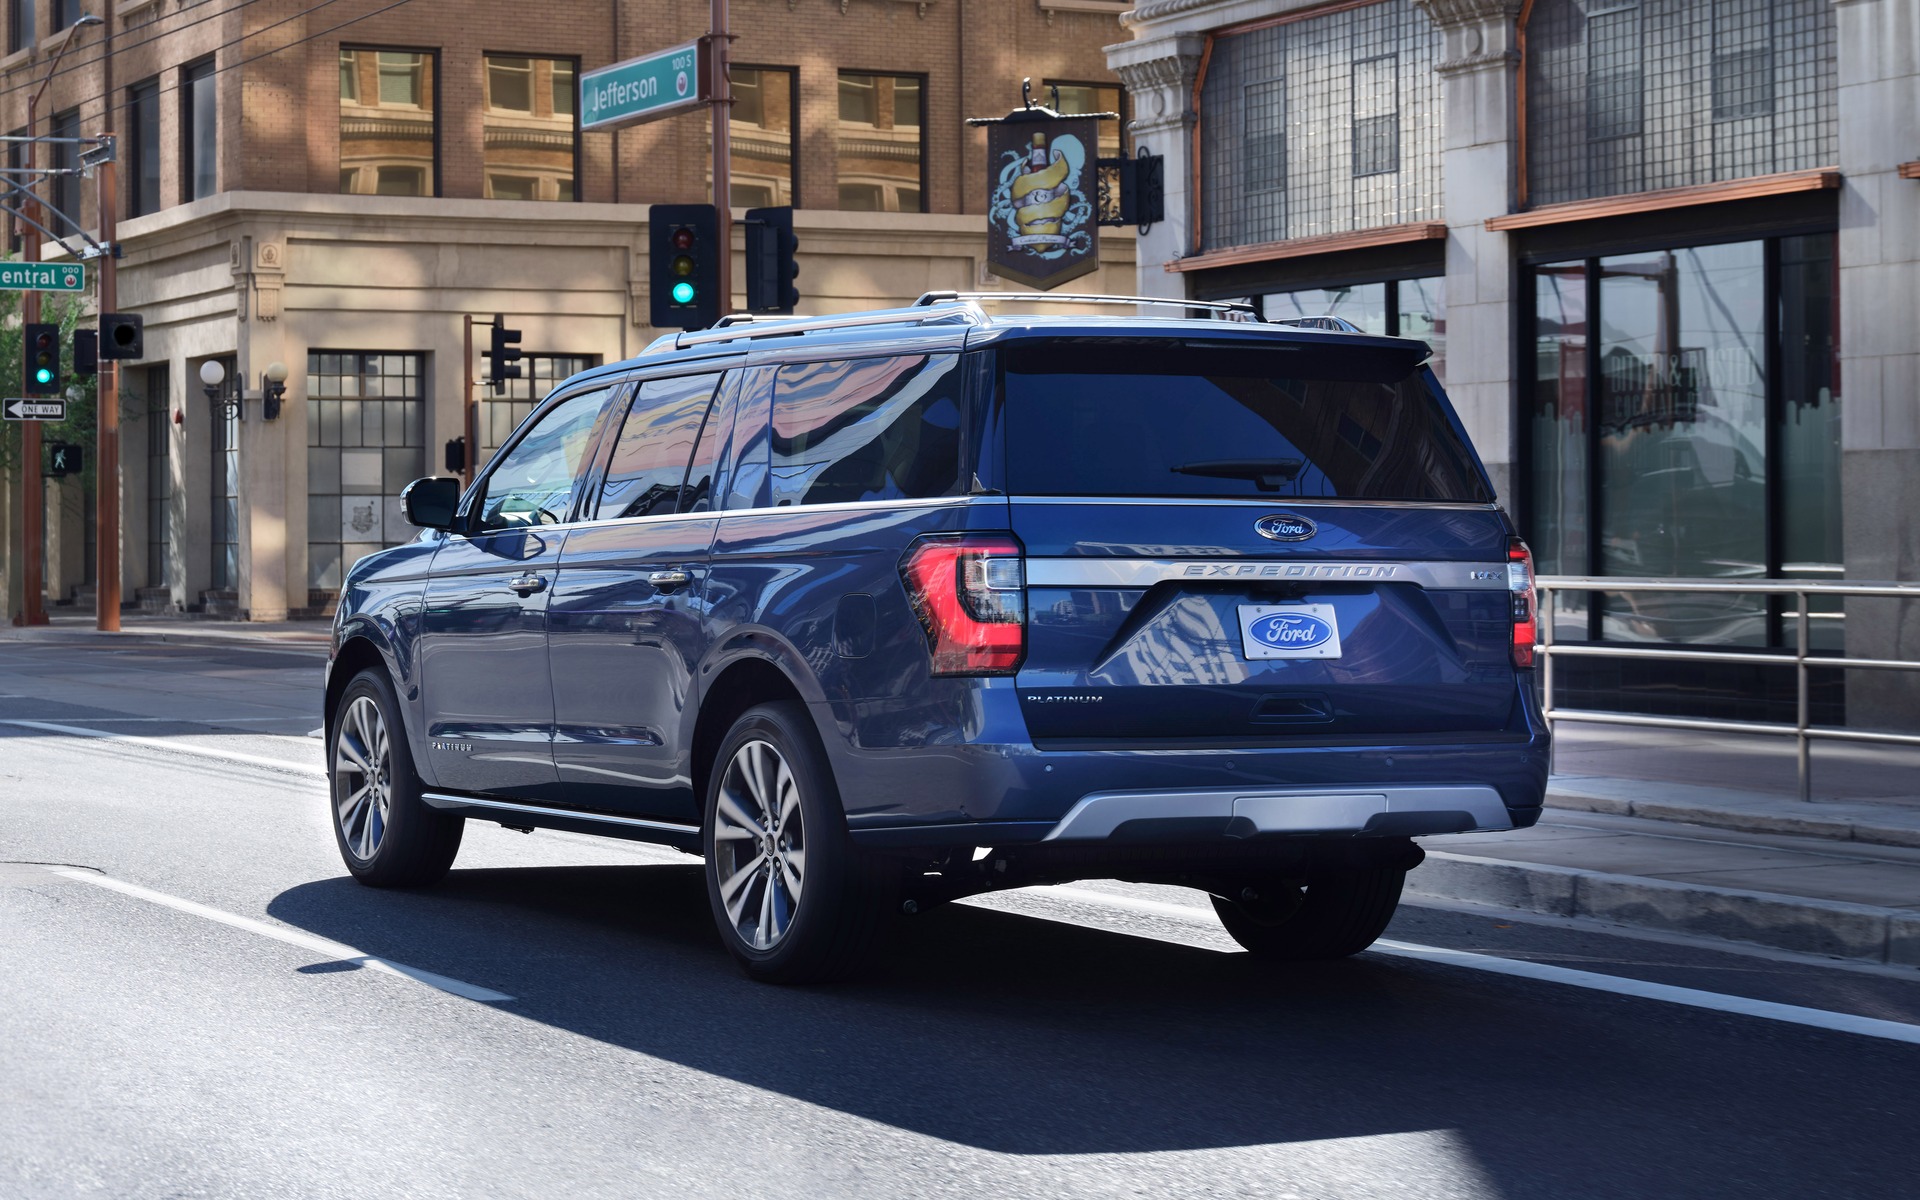 2020 Ford Expedition Adds King Ranch Model, Platinum Features - 9/11